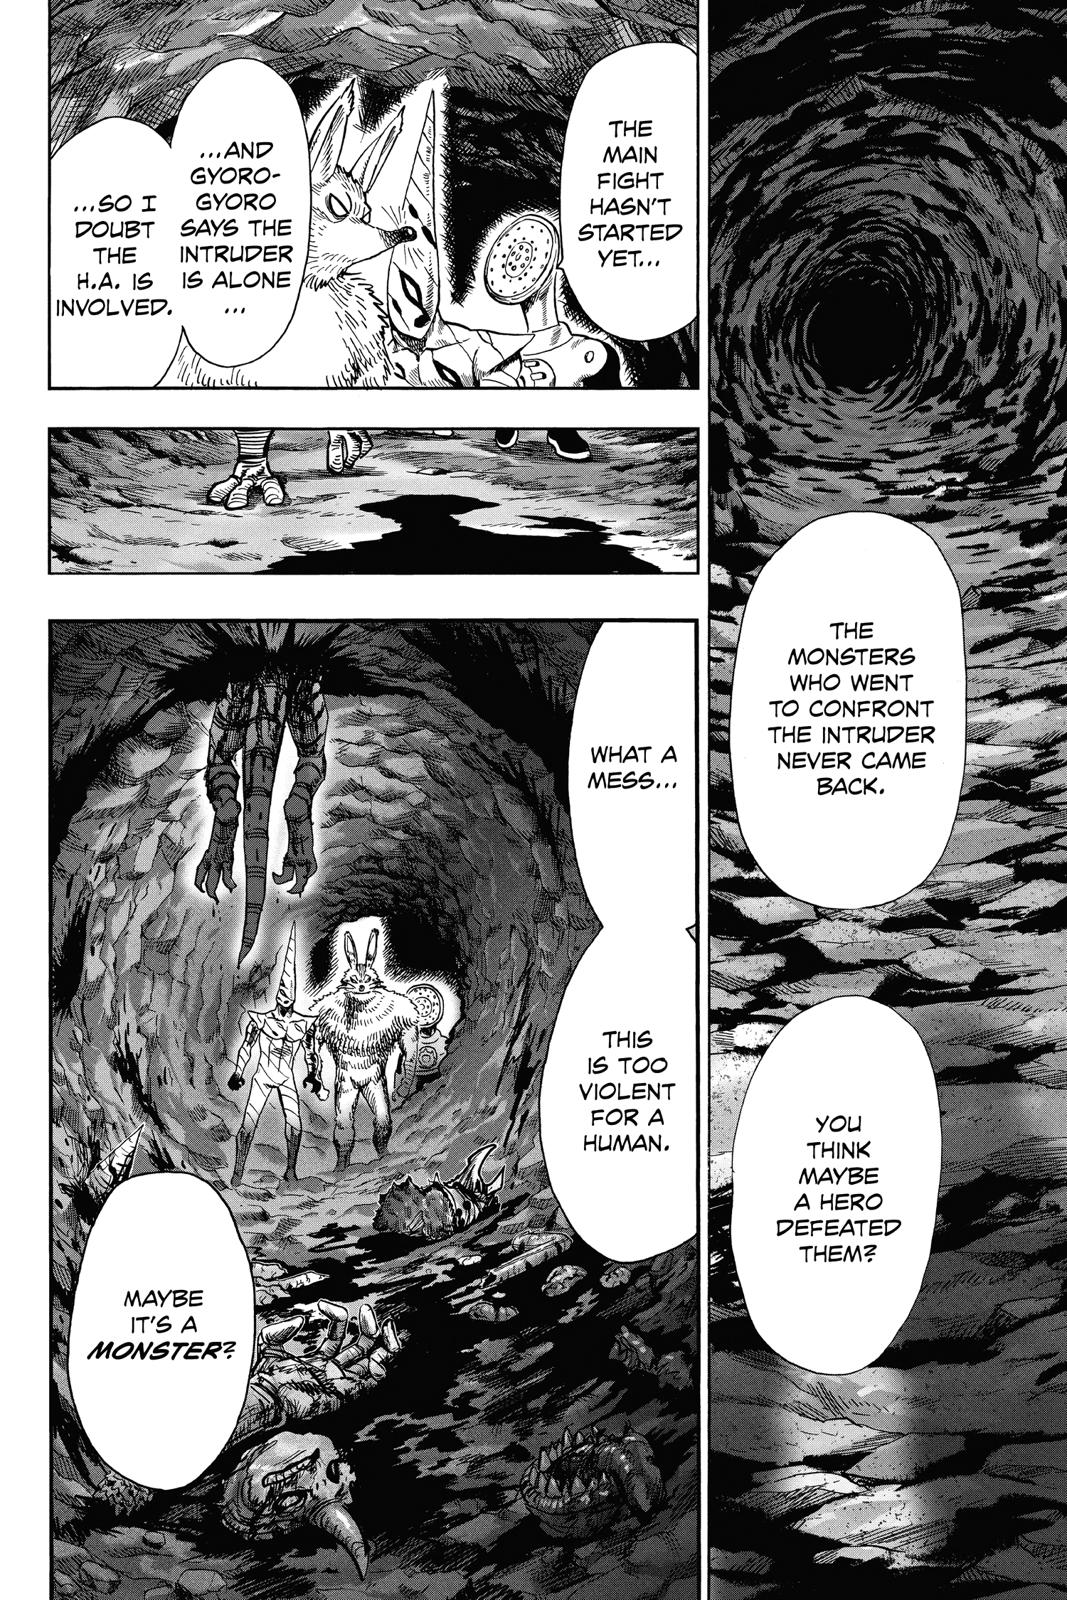 One-Punch Man, Punch 92 image 27